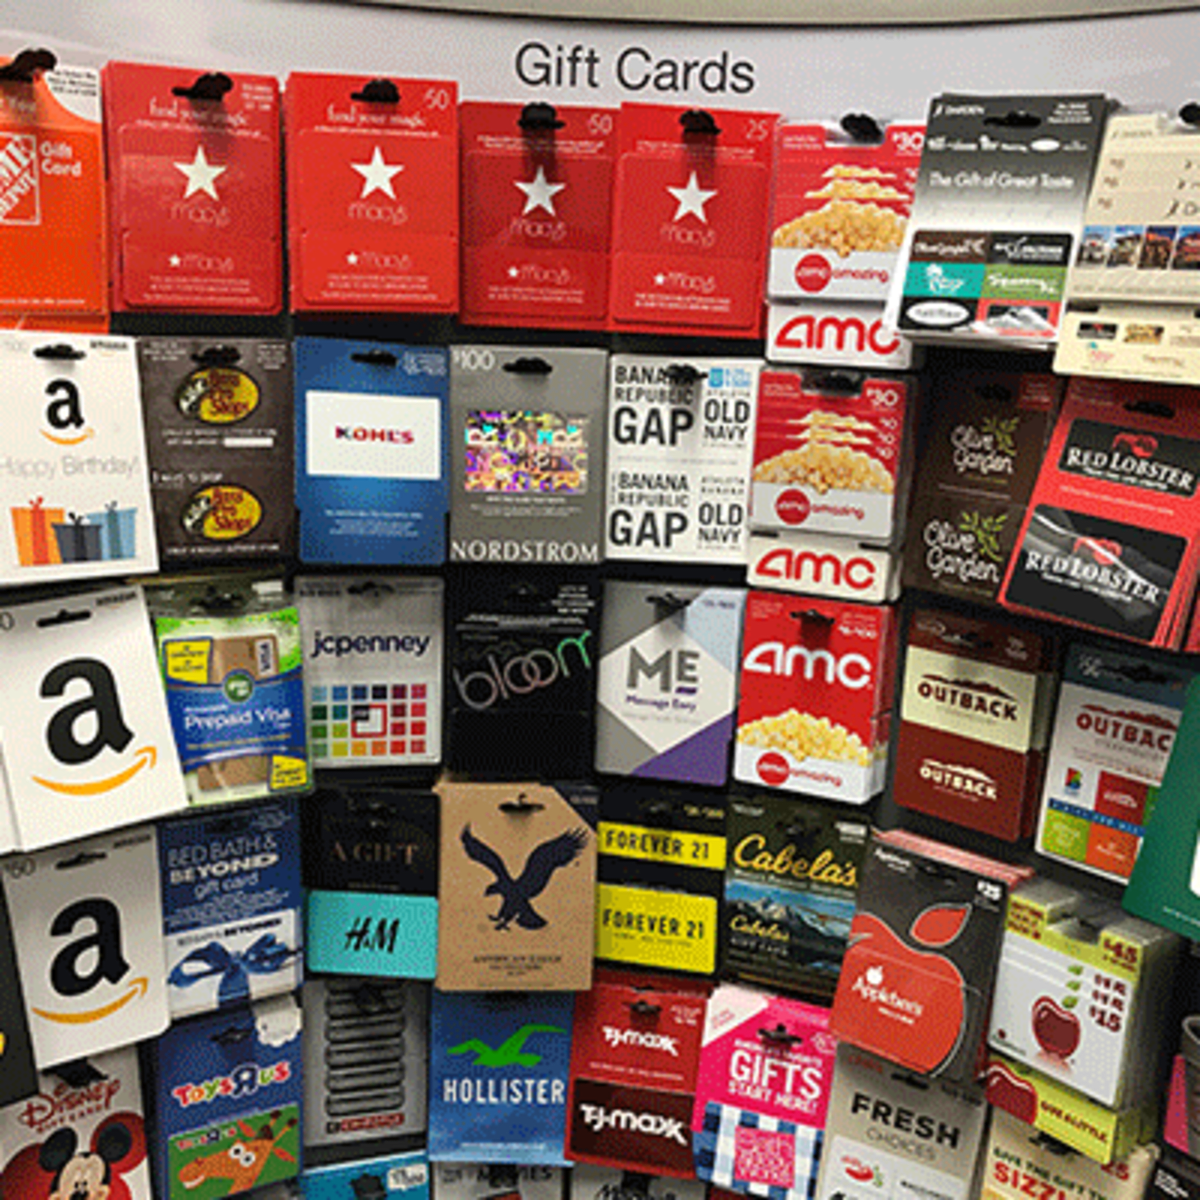 https://www.thestreet.com/.image/ar_1:1%2Cc_fill%2Ccs_srgb%2Cq_auto:good%2Cw_1200/MTY4NjUxMjYxNDI1NjkwNTE5/10-best-gift-cards-for-your-dollar.png